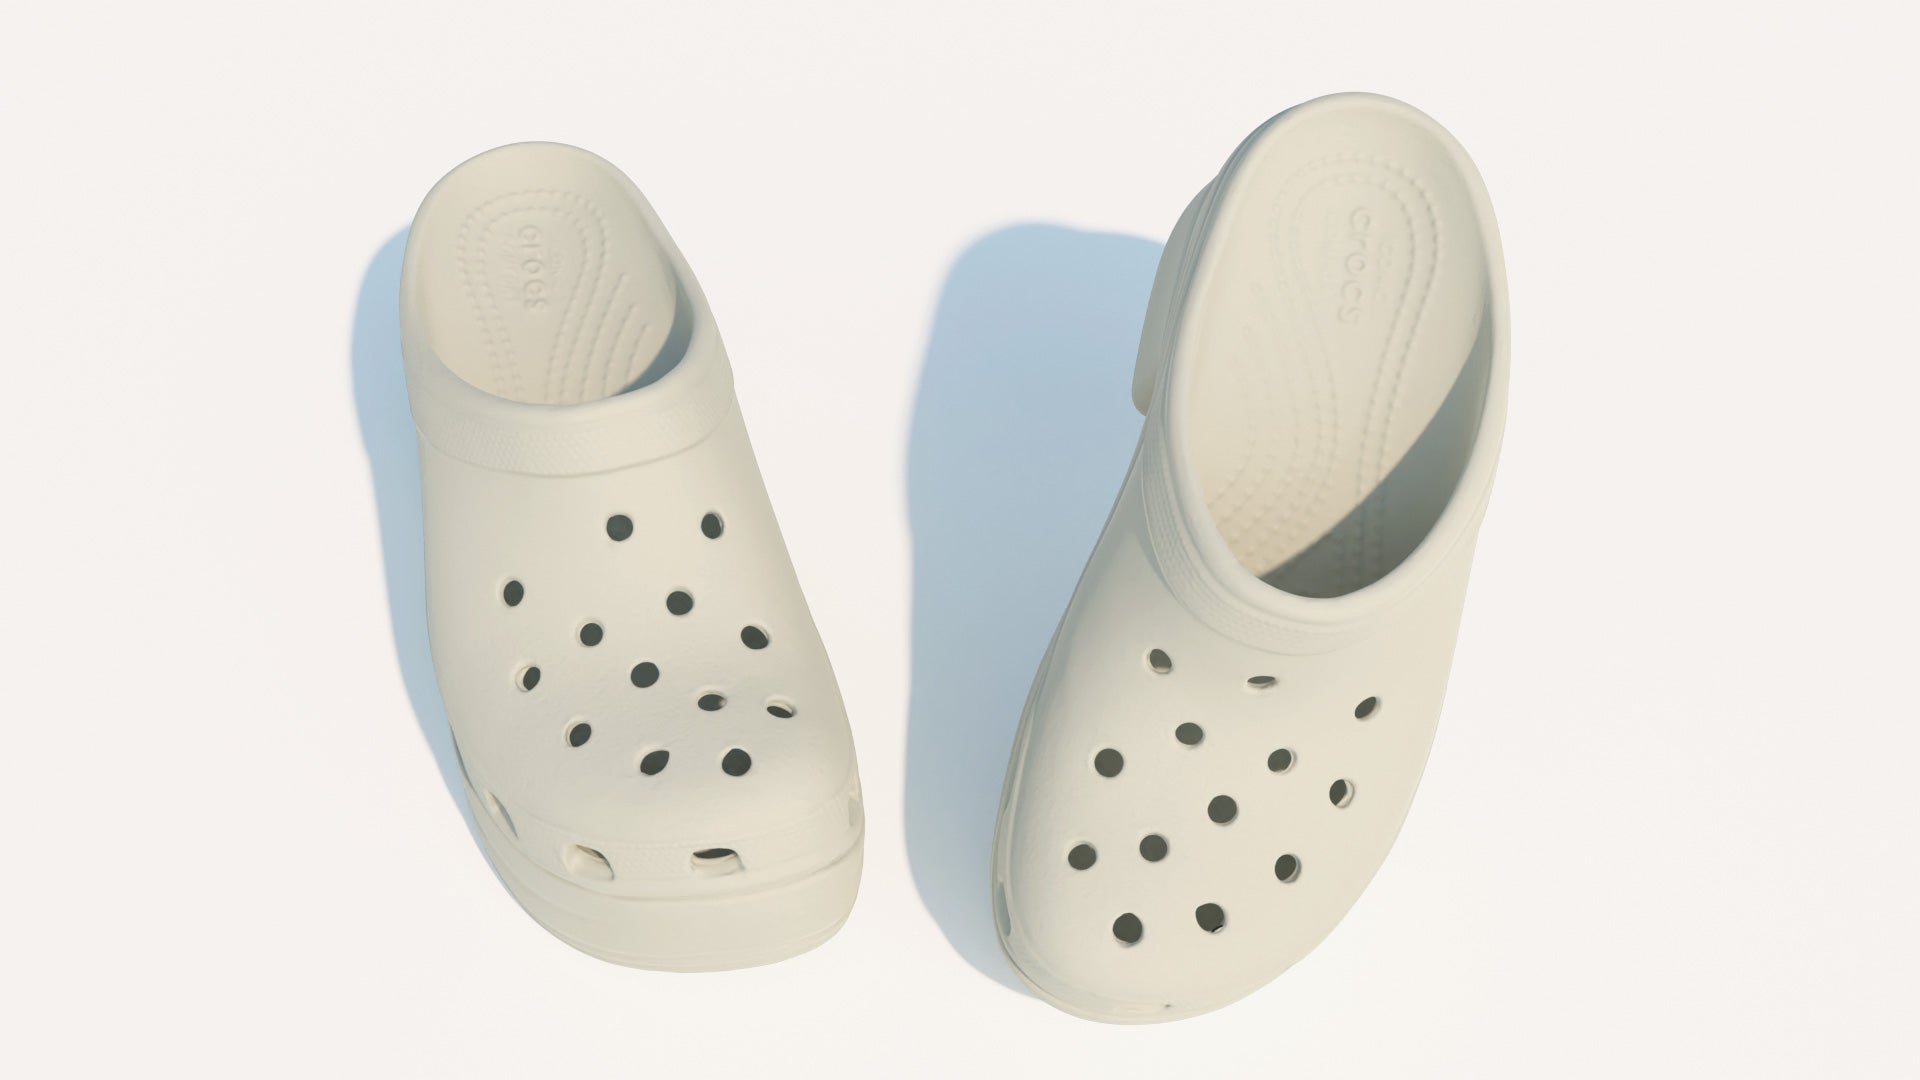 A 3d model of a pair of siren clogs crocs shoes seen from above, were the details and bumps of the sole can be appreciated